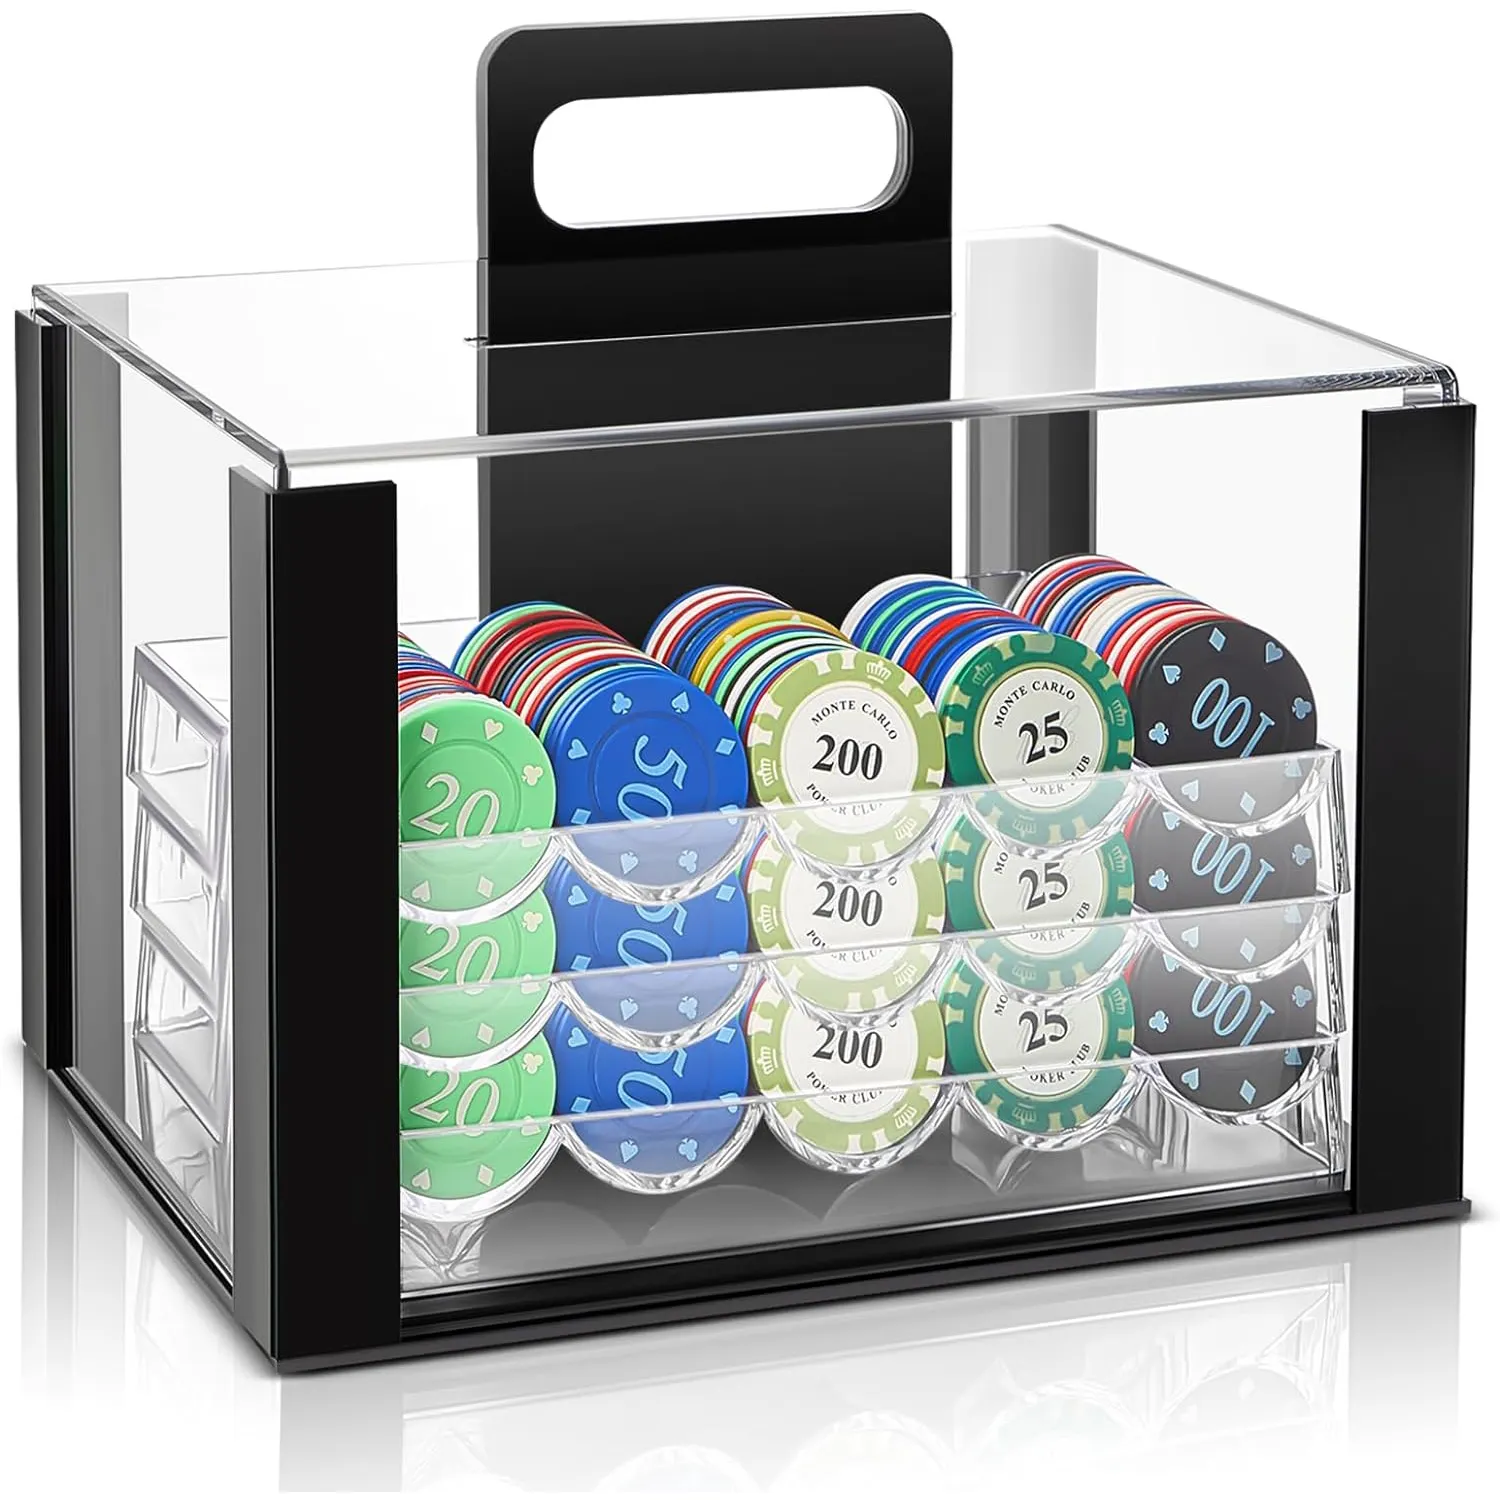 Clear Acrylic Poker Chip Carrier 300/1000 Capacity Chips Case Acrylic Casino Poker Display Acrylic Poker Chip Tray